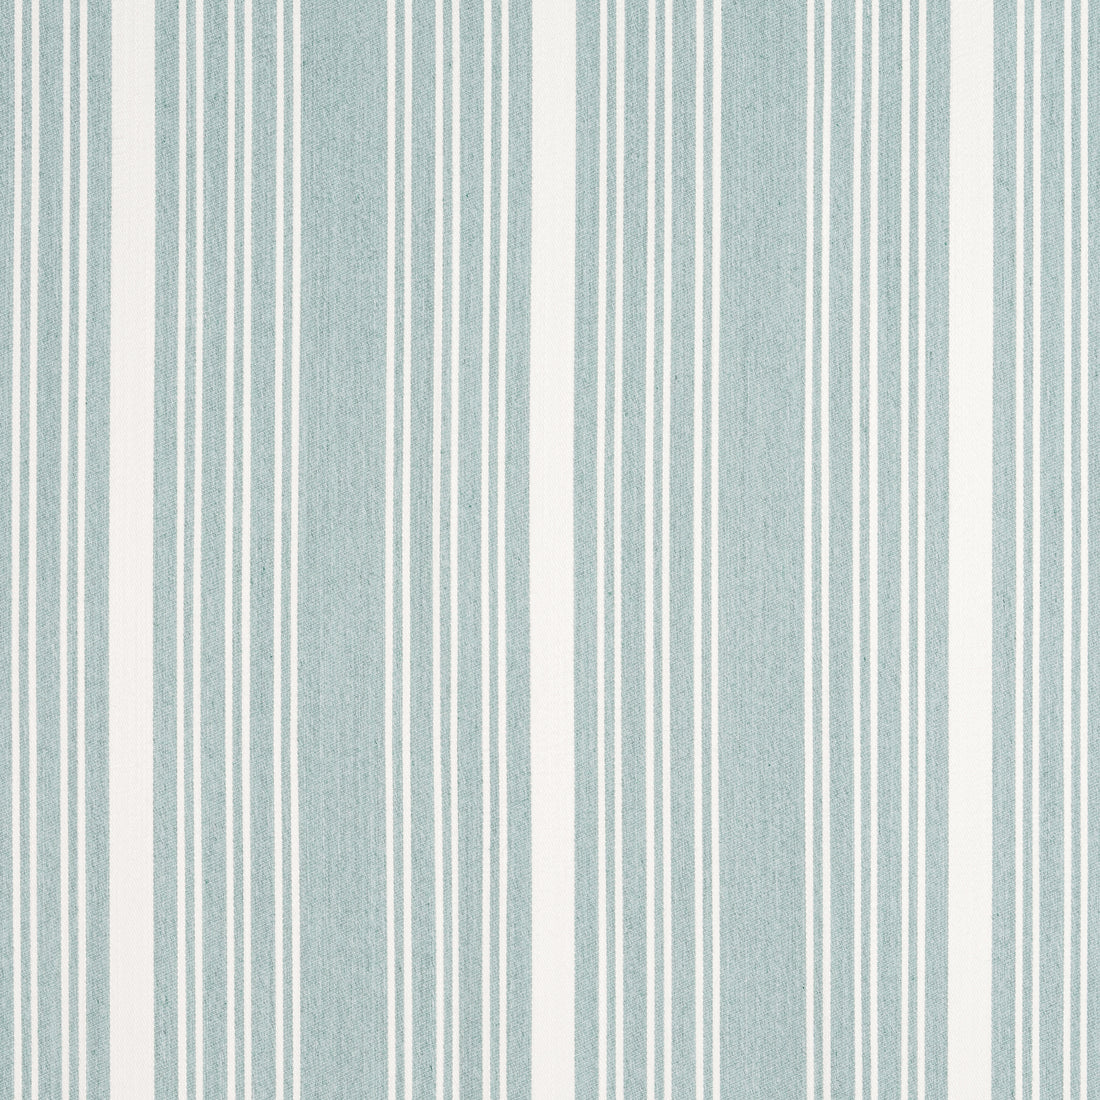 Kaia Stripe fabric in seafoam color - pattern number W8541 - by Thibaut in the Villa collection